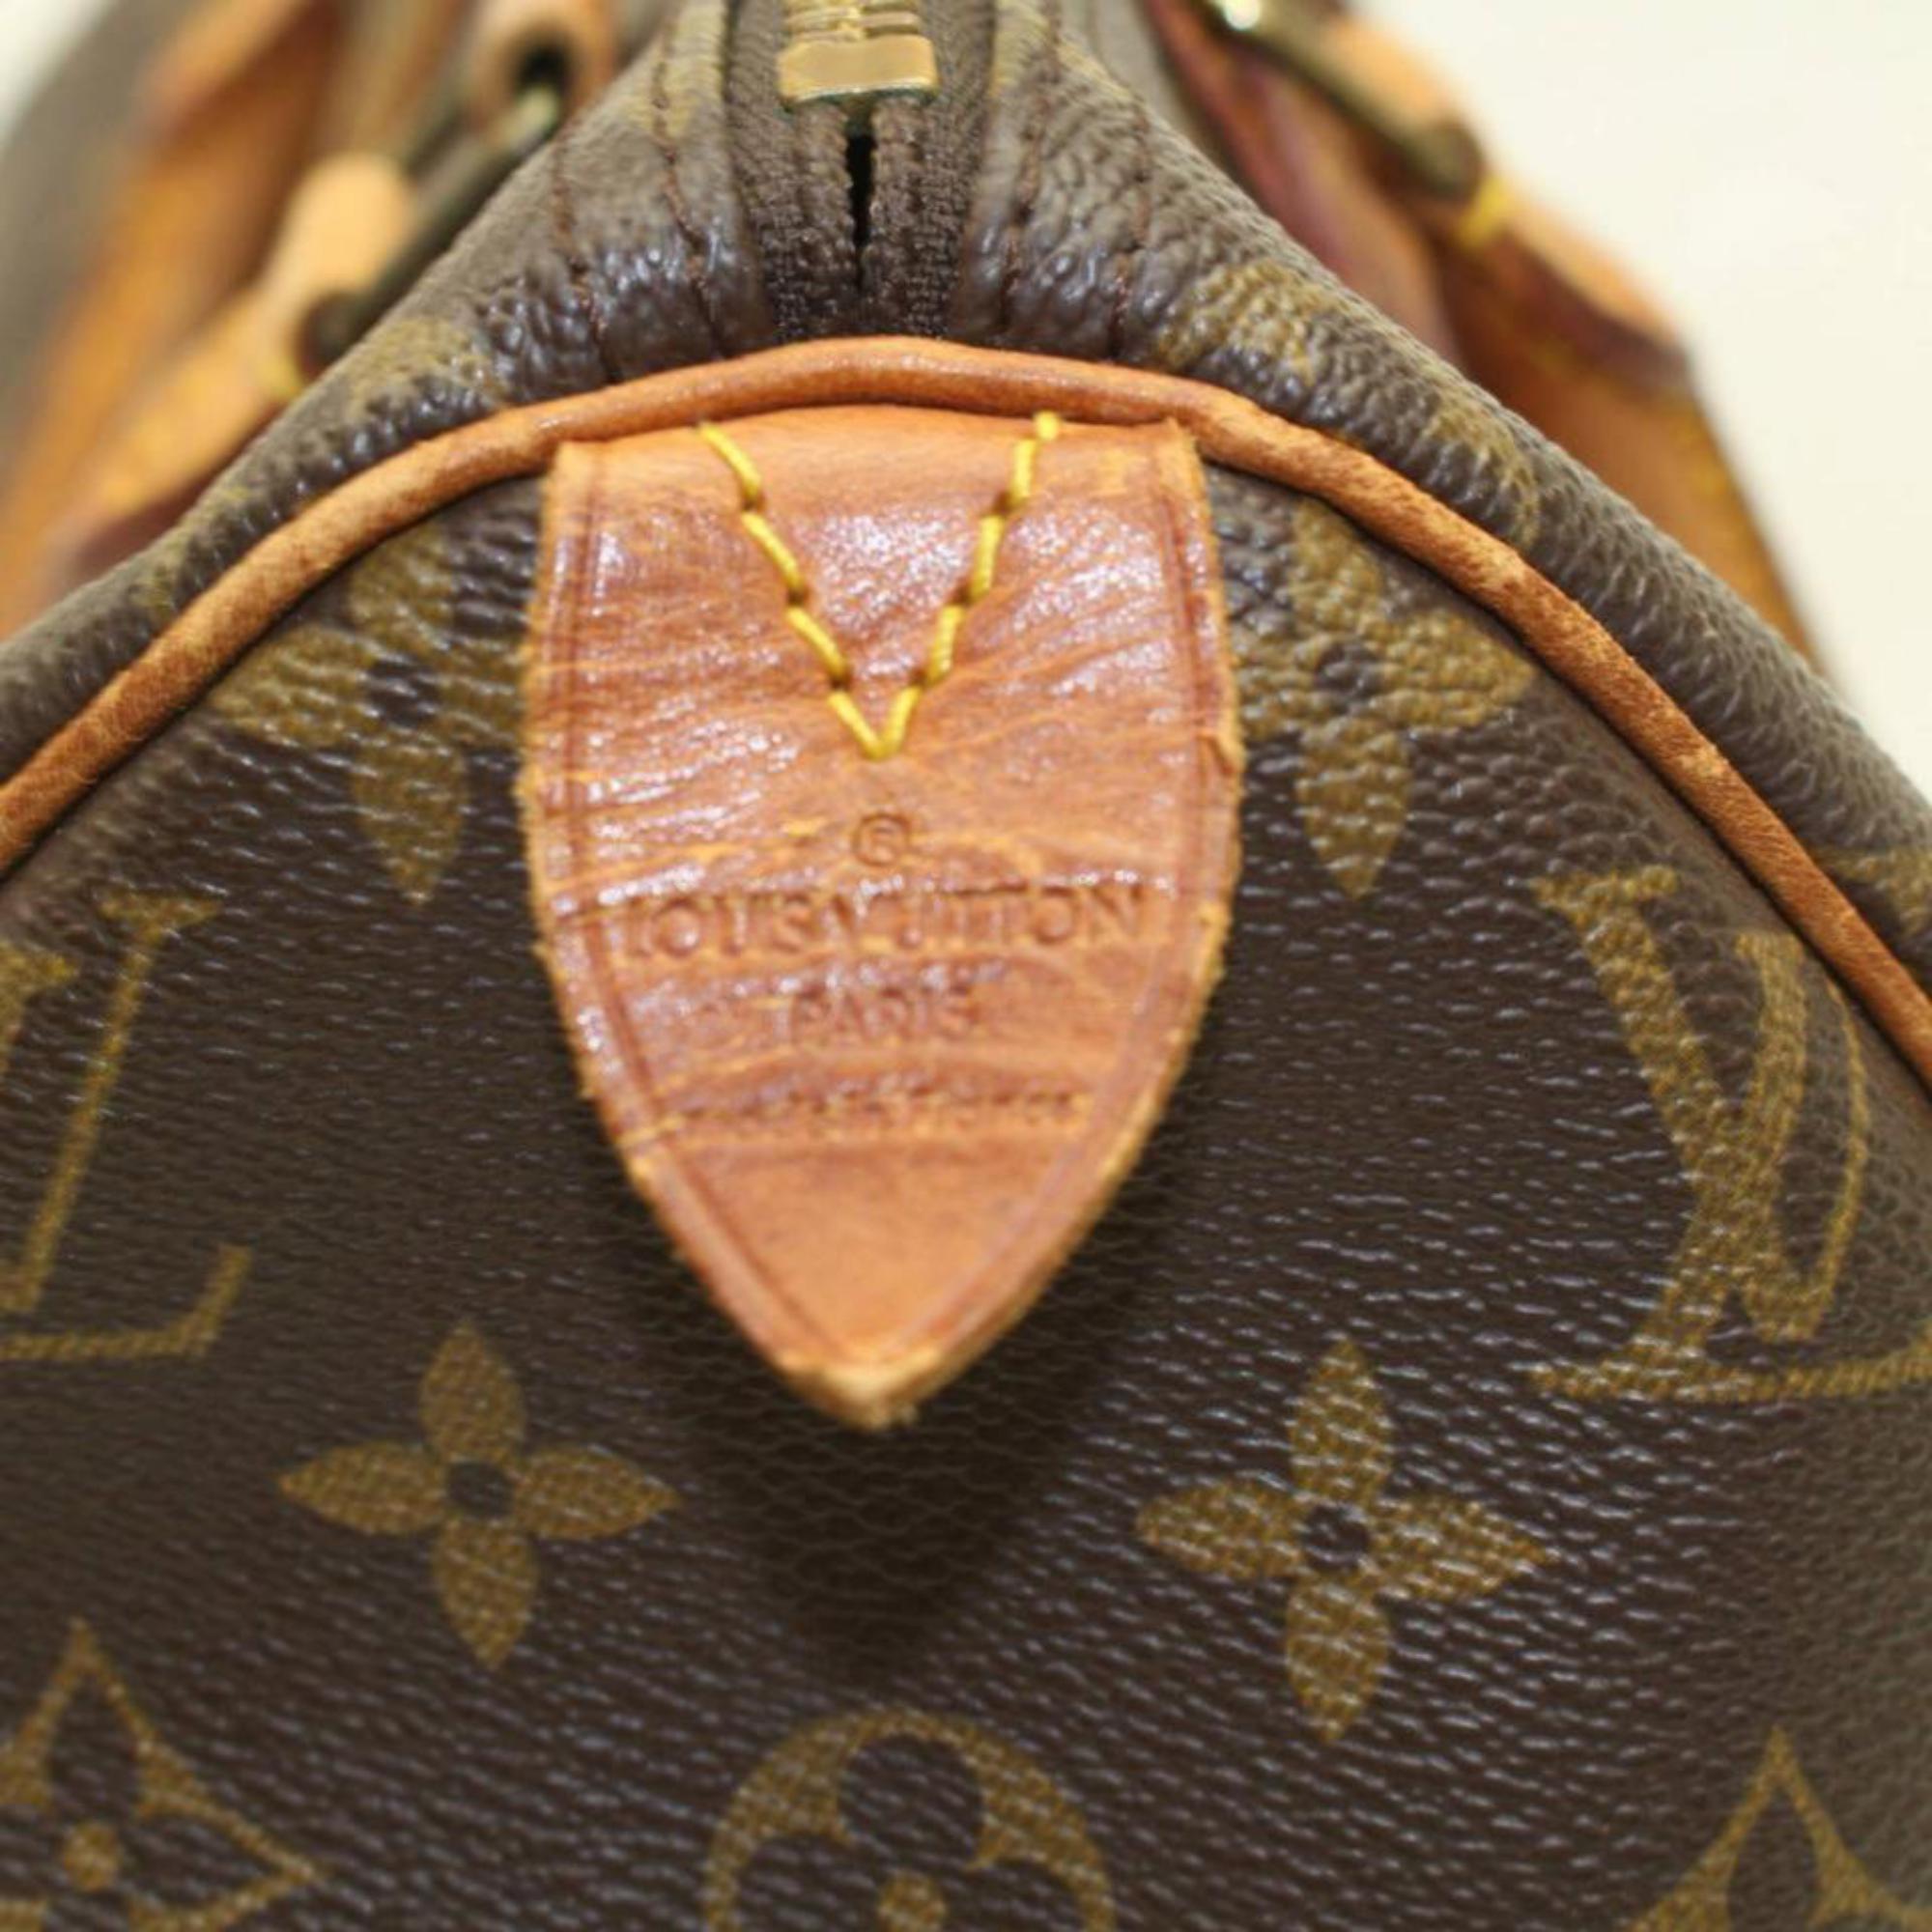 Louis Vuitton Speedy Monogram 30 Boston Mm 869720 Brown Coated Canvas Satchel In Good Condition For Sale In Forest Hills, NY